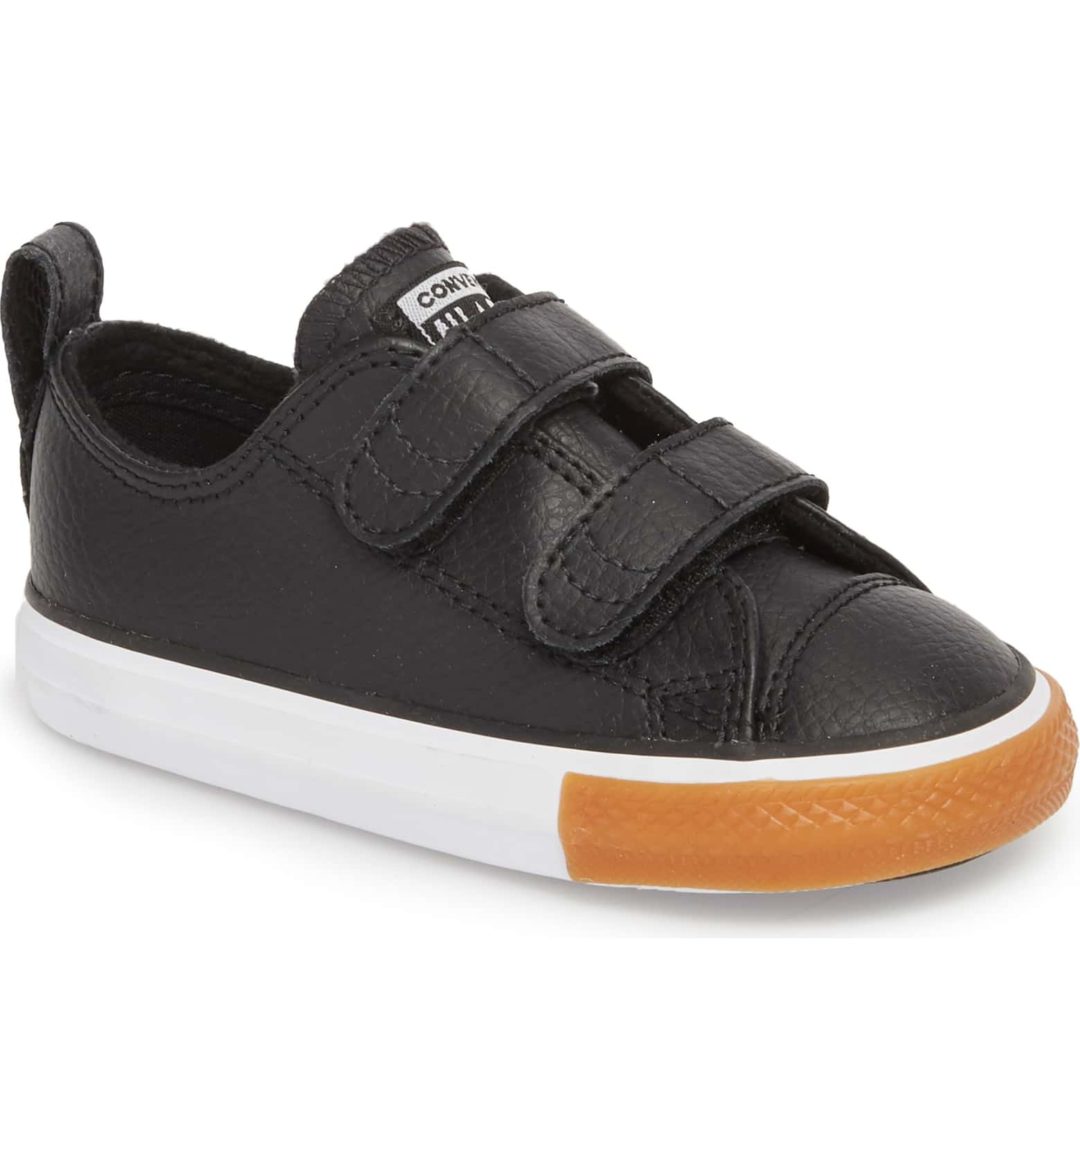 Toddler Shoes I Love - Now & Gen